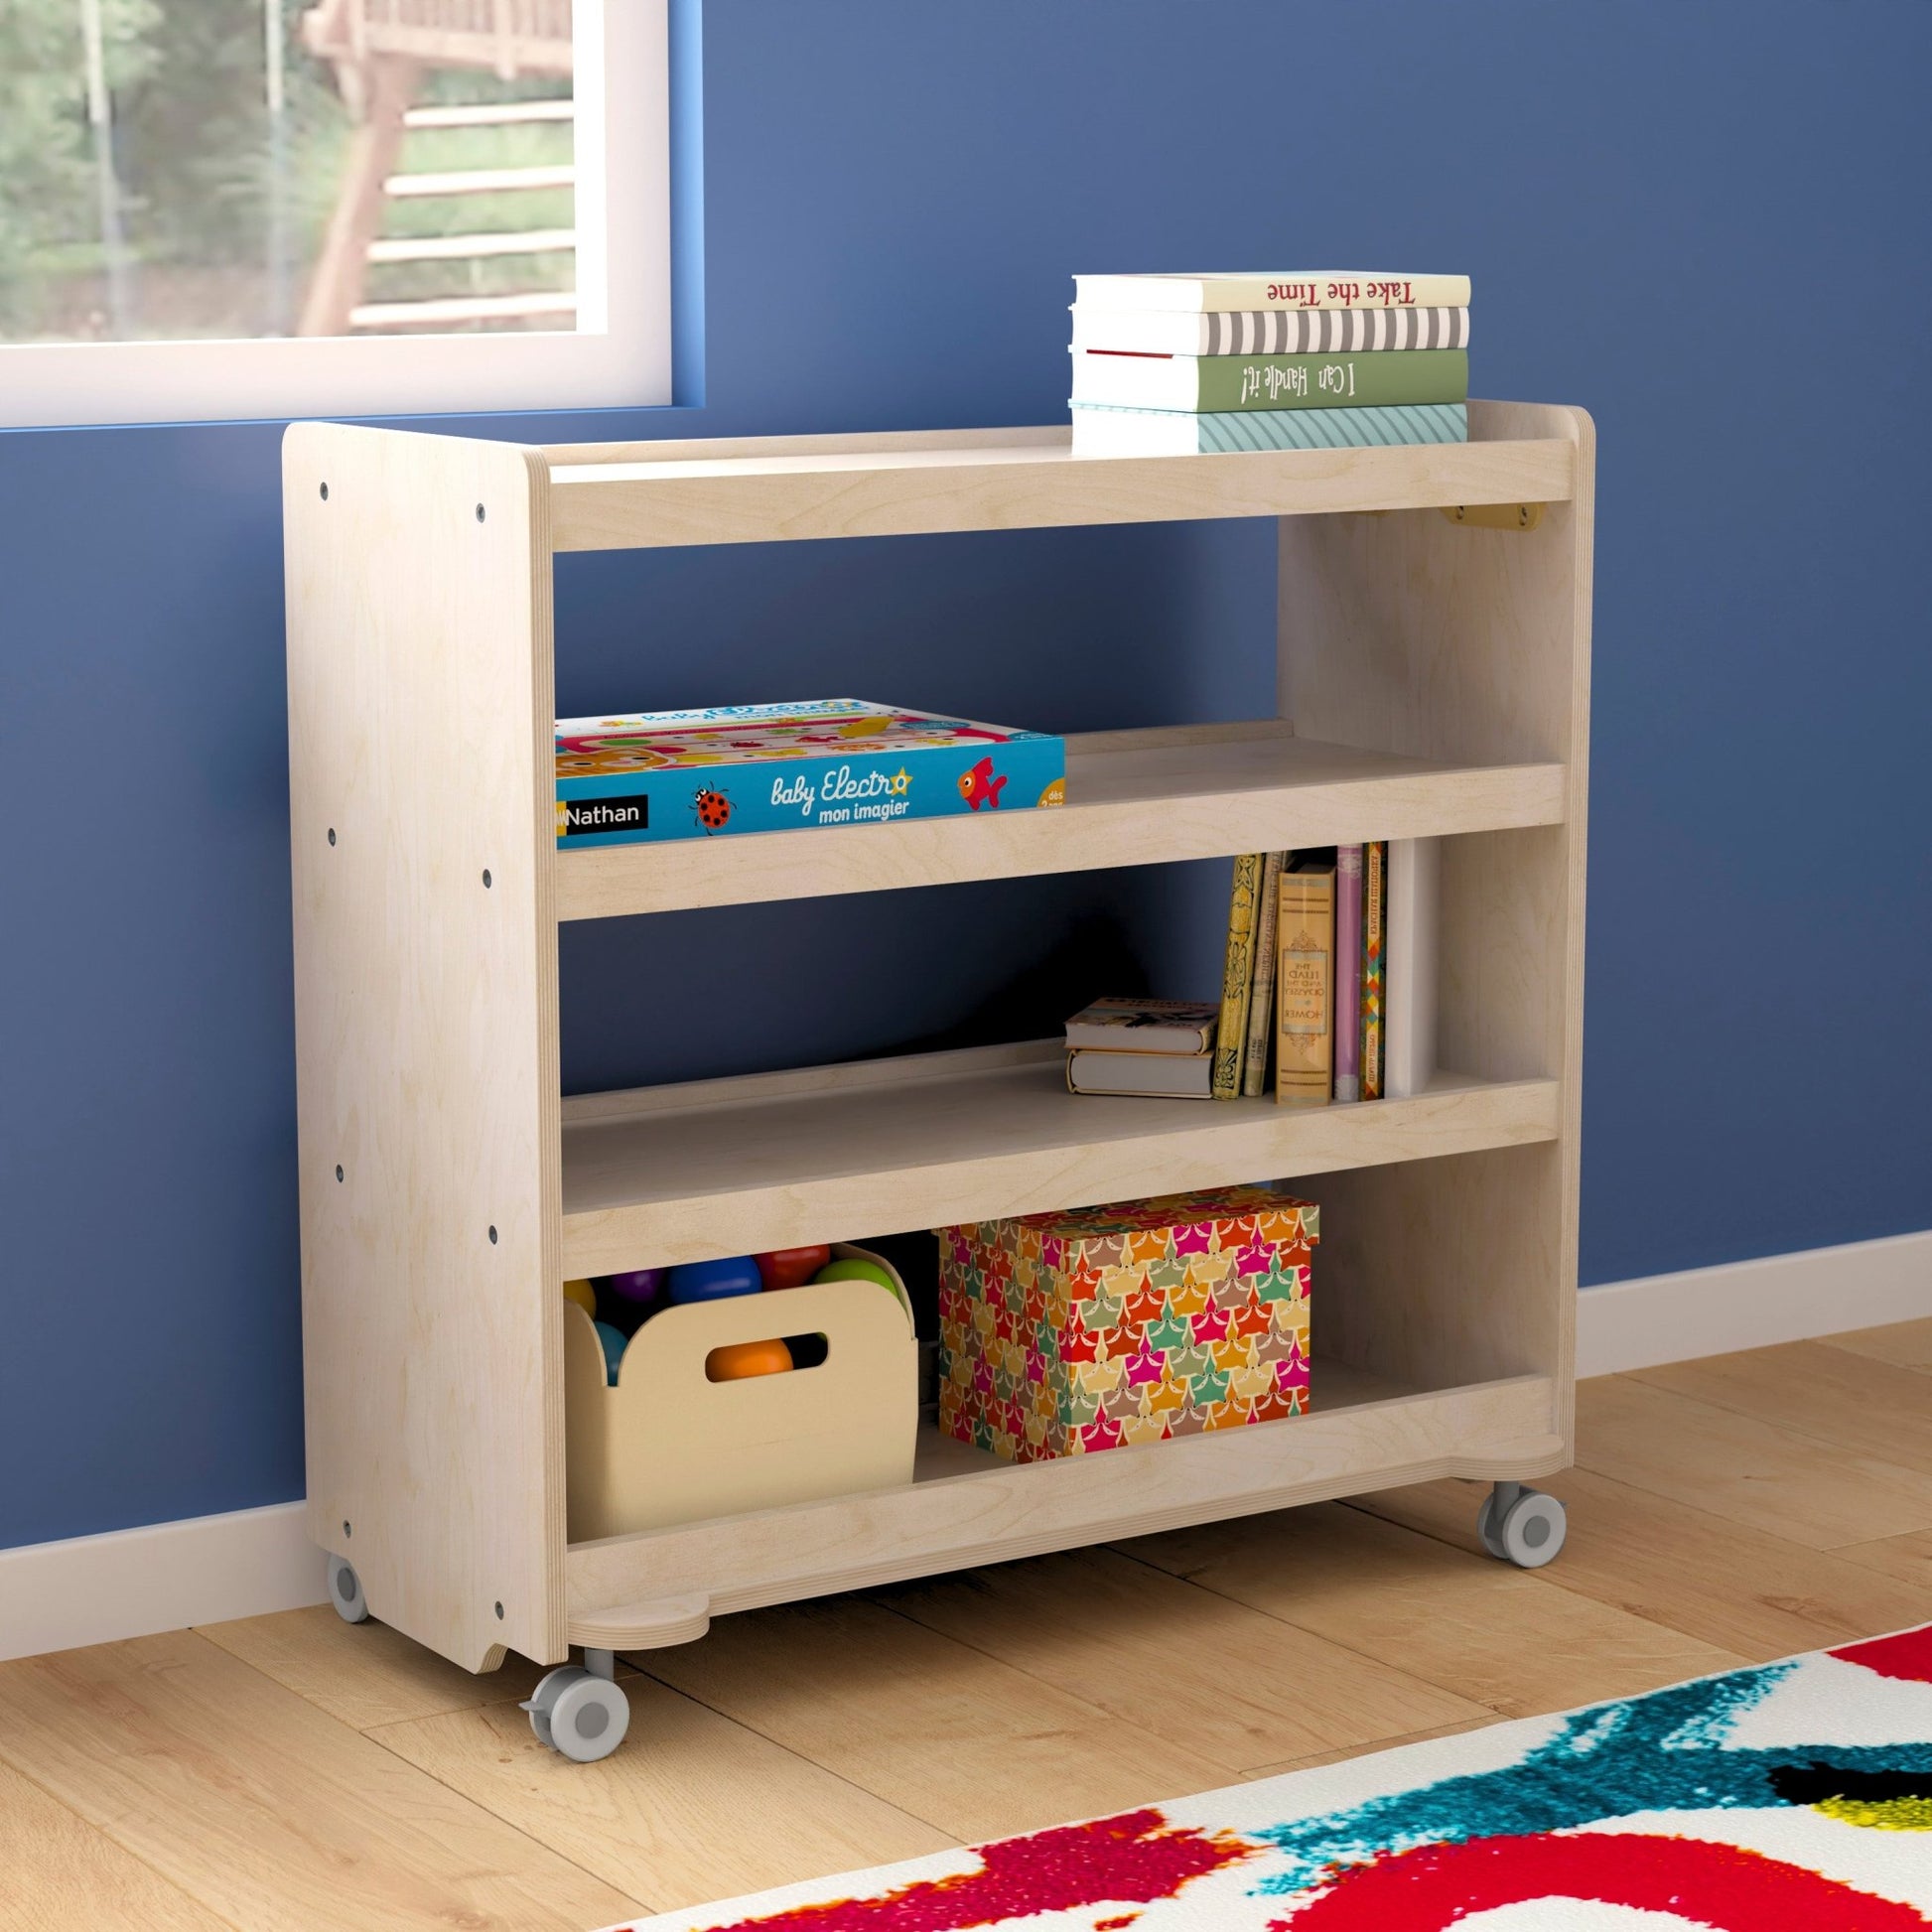 Bright Beginnings Commercial Grade Space Saving 4 Shelf Wooden Mobile Classroom Storage Cart with Locking Caster Wheels, Kid Friendly Design, Natural - SchoolOutlet